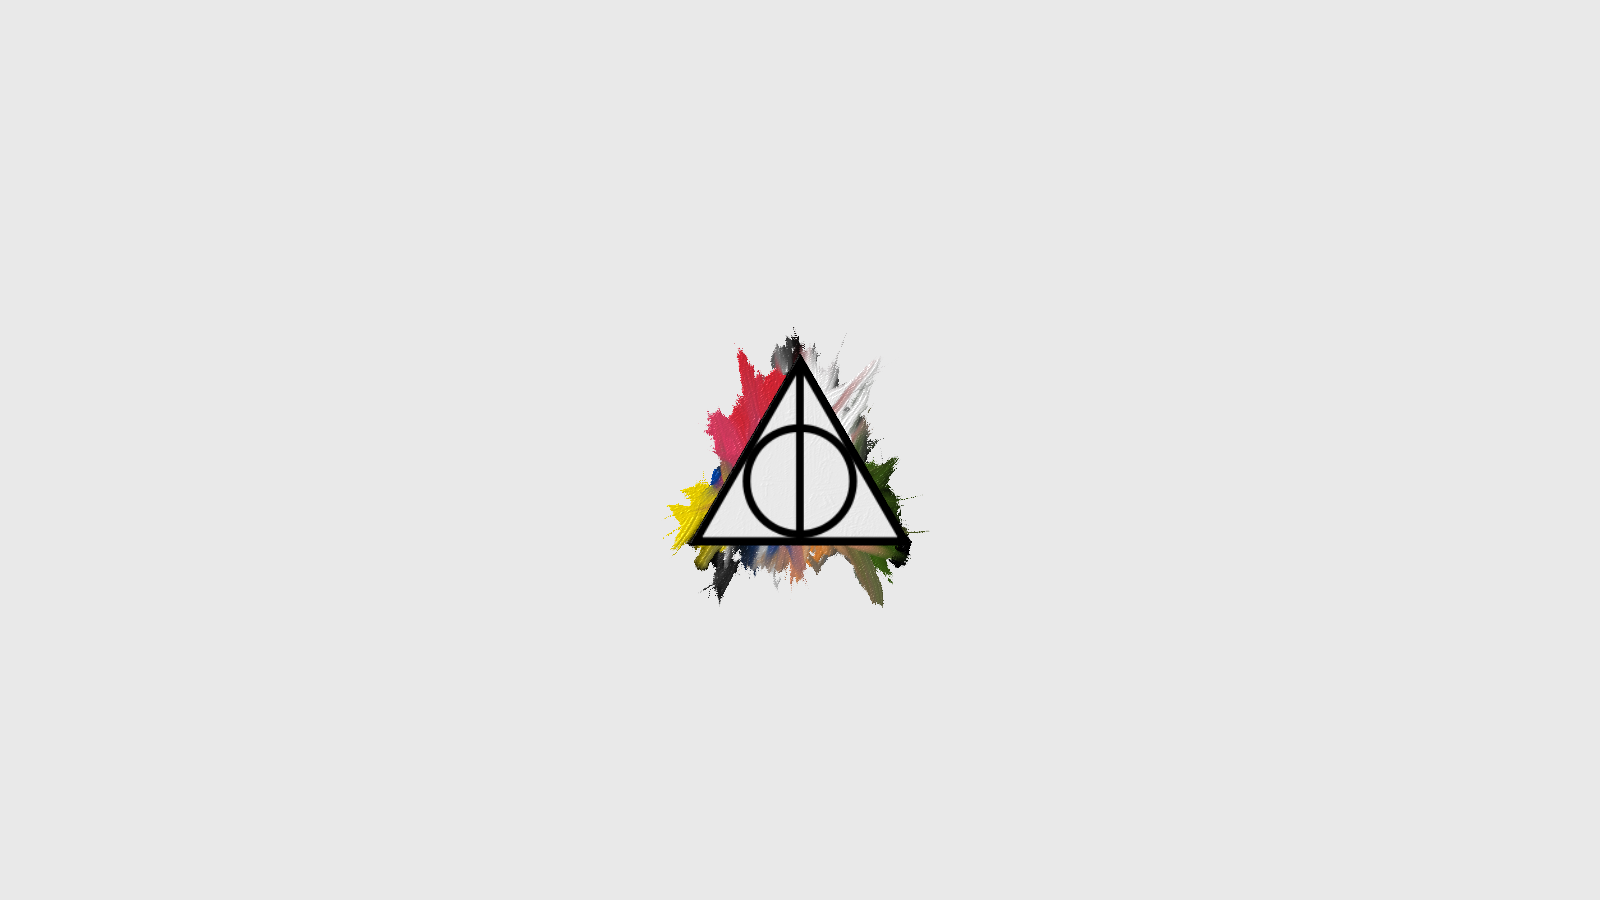 Free download Harry Potter Tumblr Wallpaper Harry potter and the deathly [1600x900] for your Desktop, Mobile & Tablet. Explore Harry Potter Wallpaper Tumblr. Harry Potter Hogwarts Wallpaper, Harry Potter